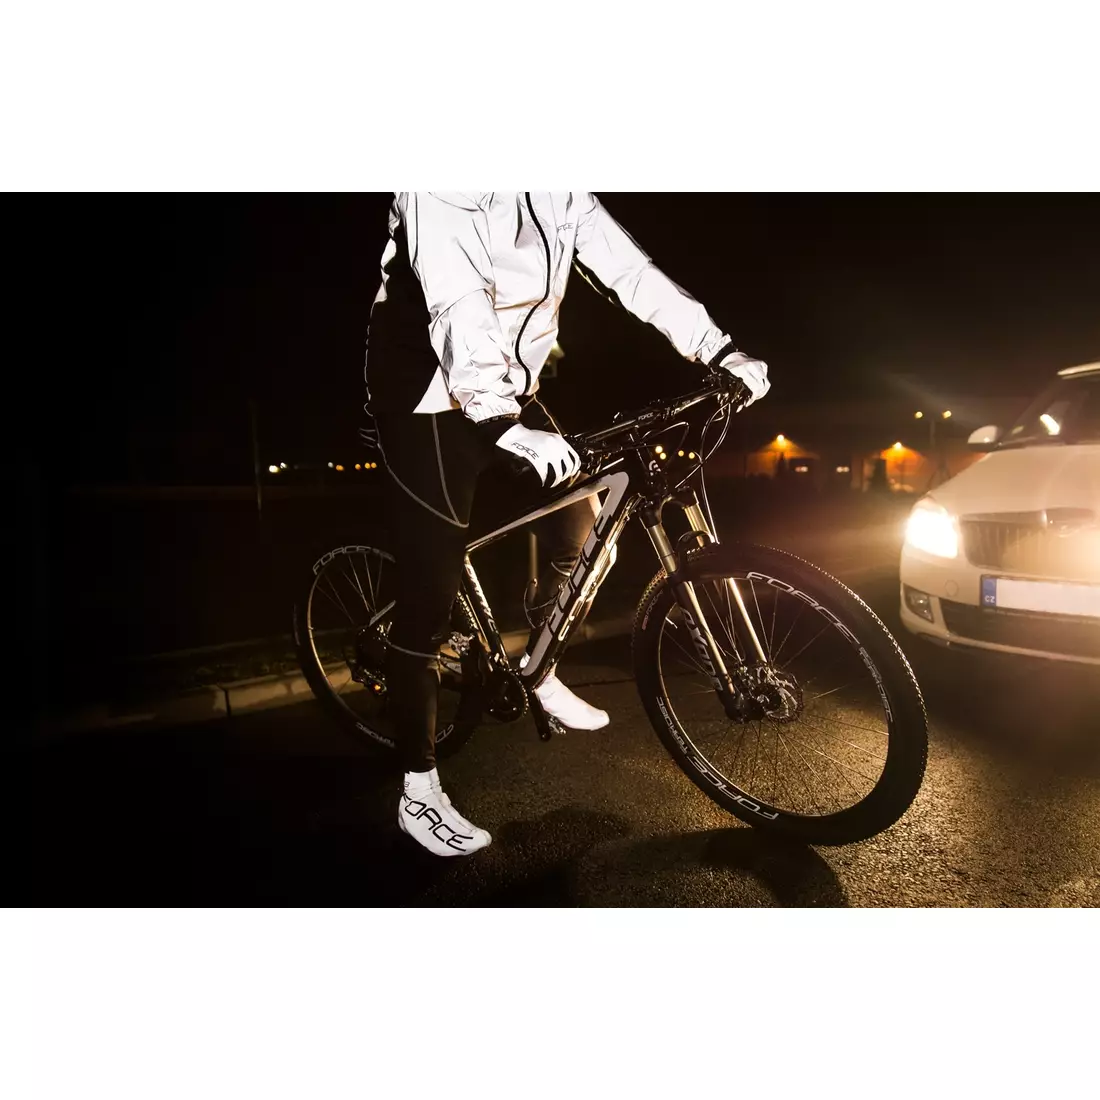 FORCE bicycle shoe covers flare reflective 90602-XL